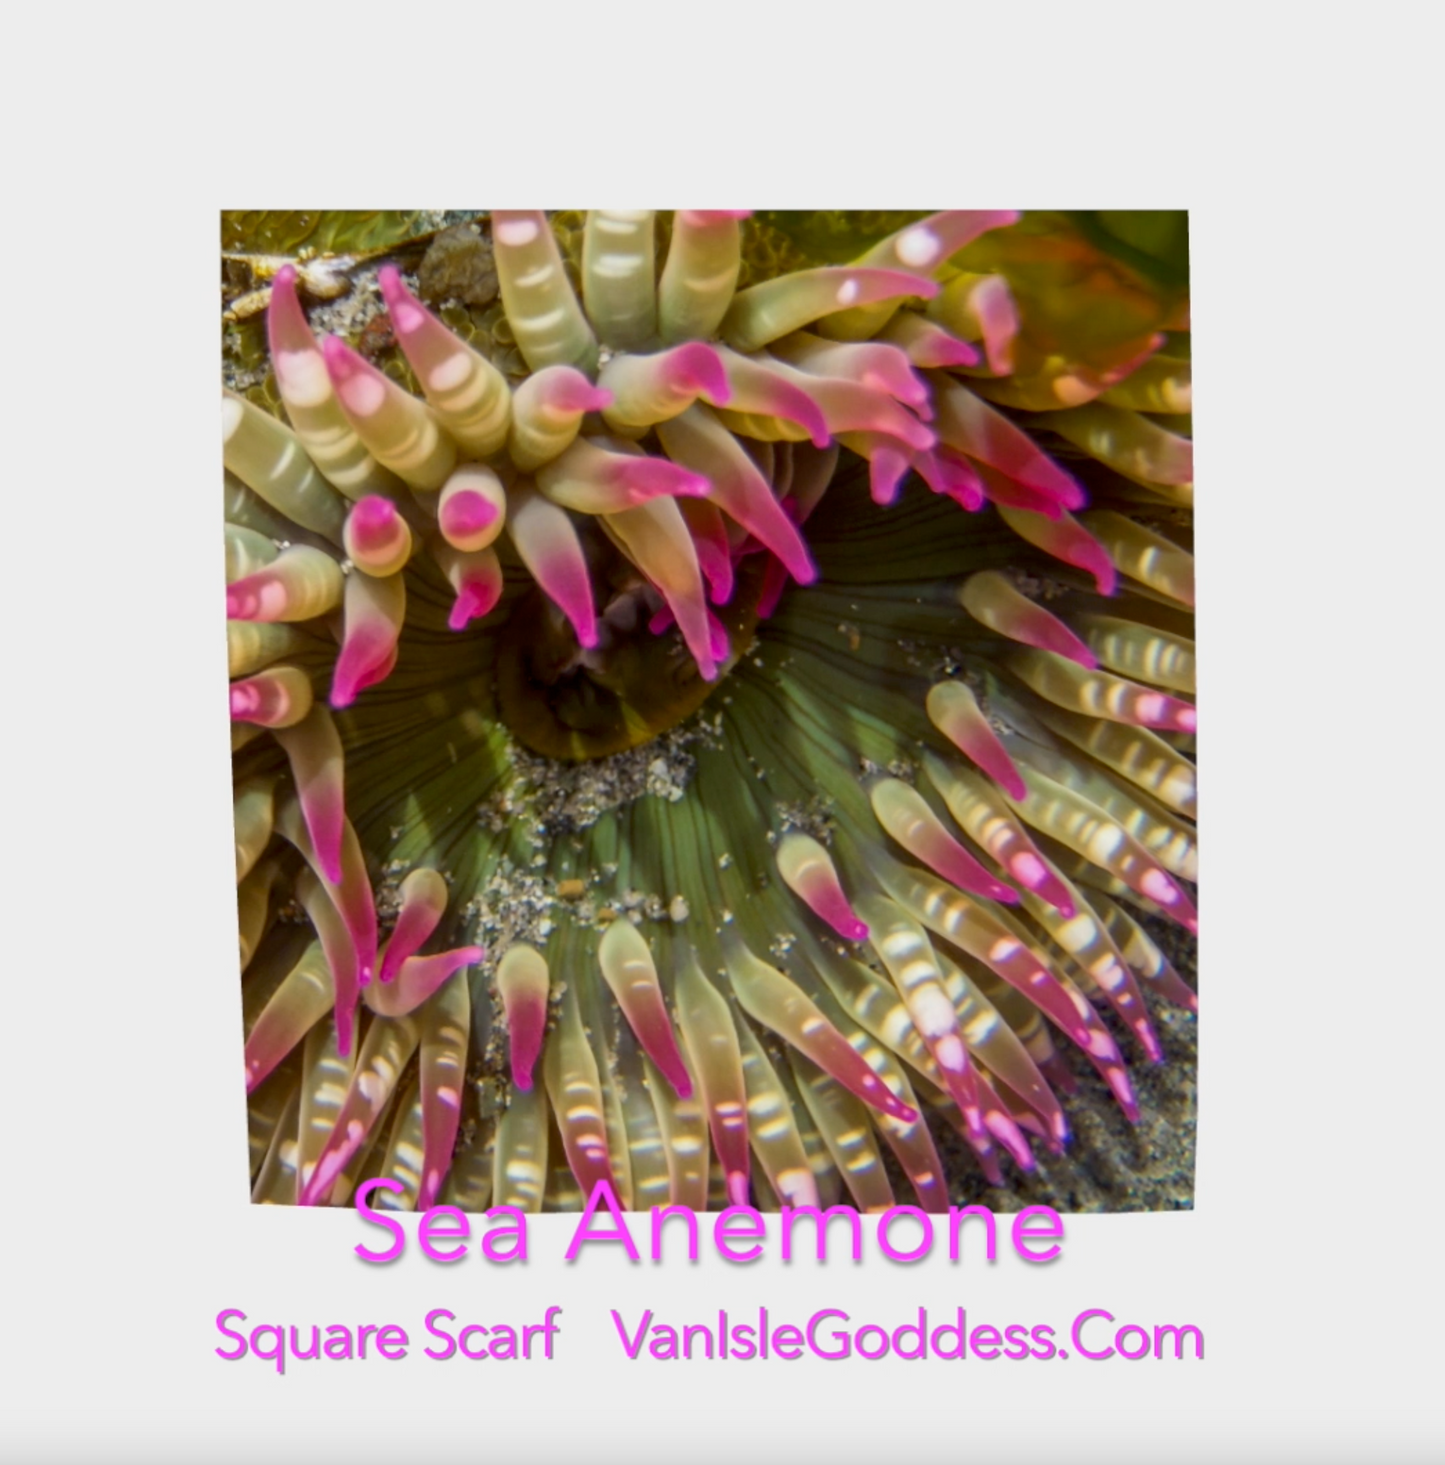 Enchanted sea anemone square scarf shown  full size.